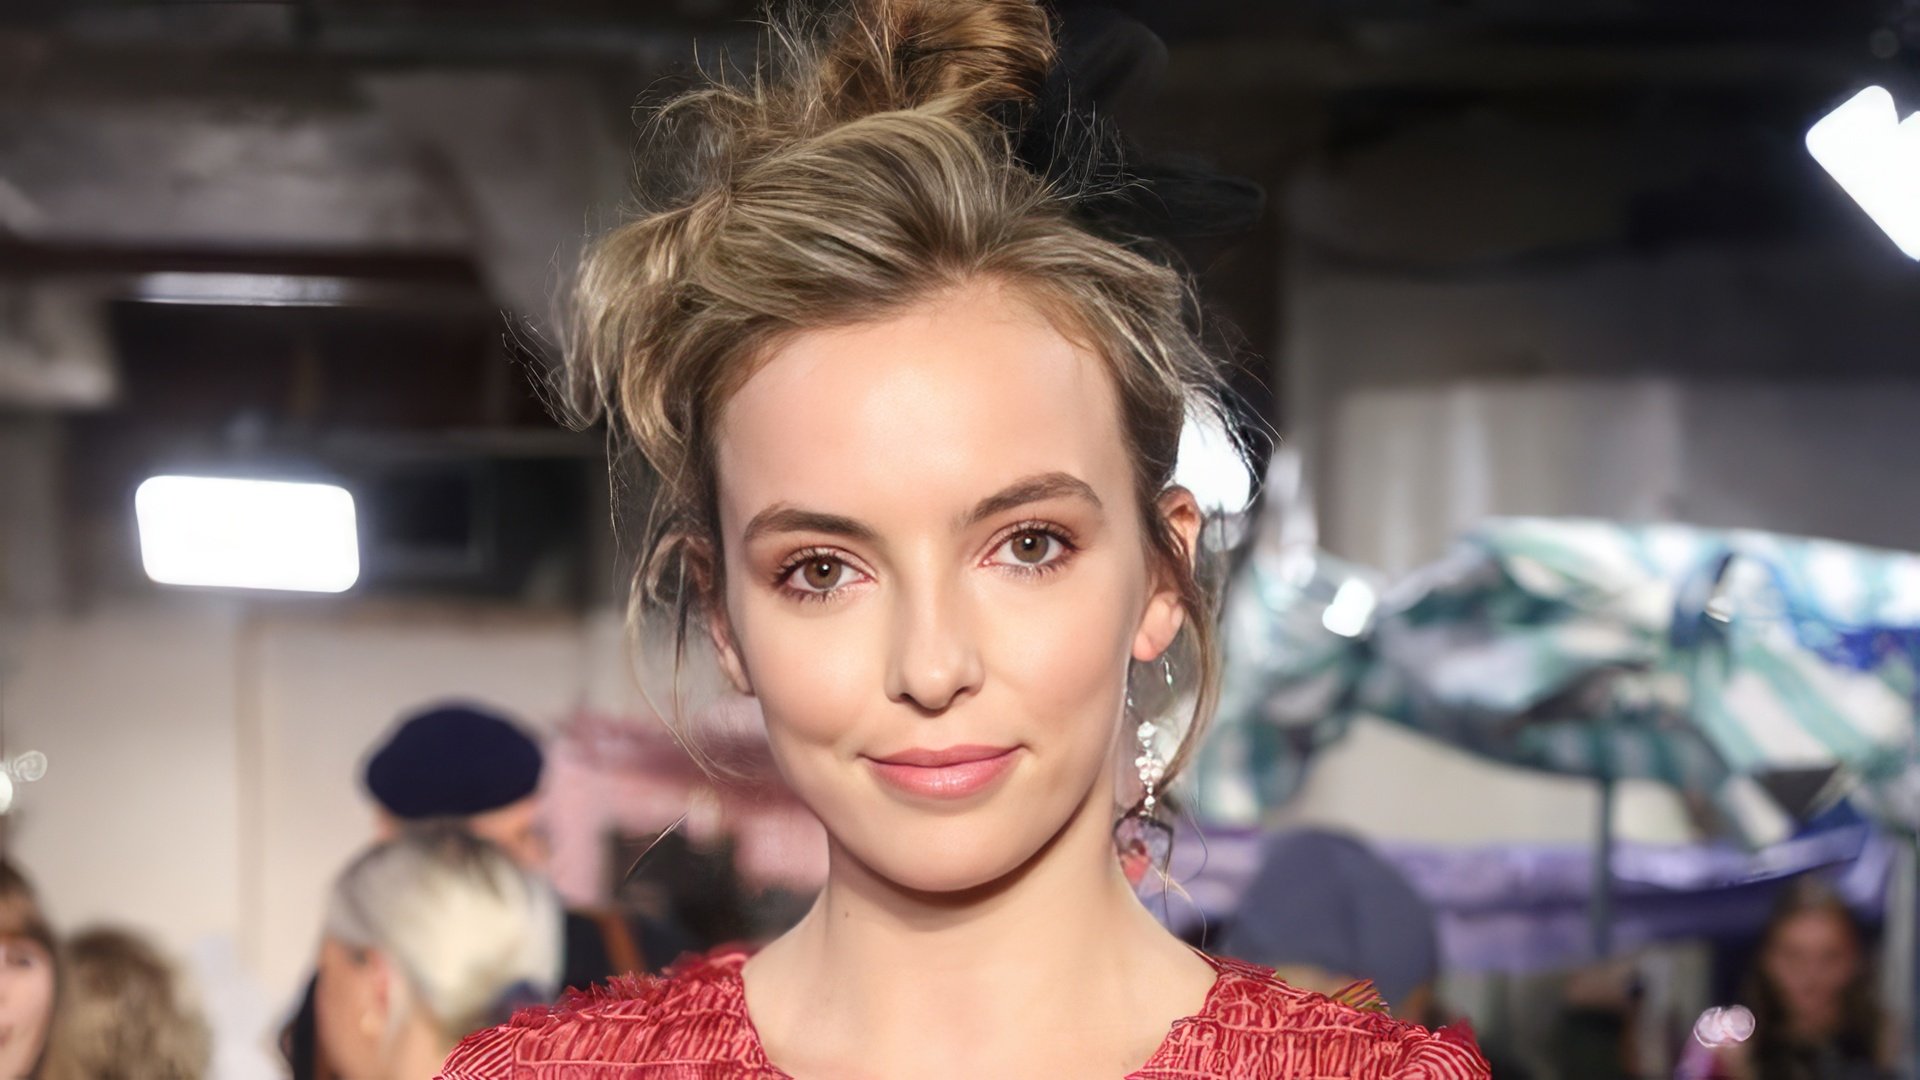  Jodie Comer does not spread her personal life